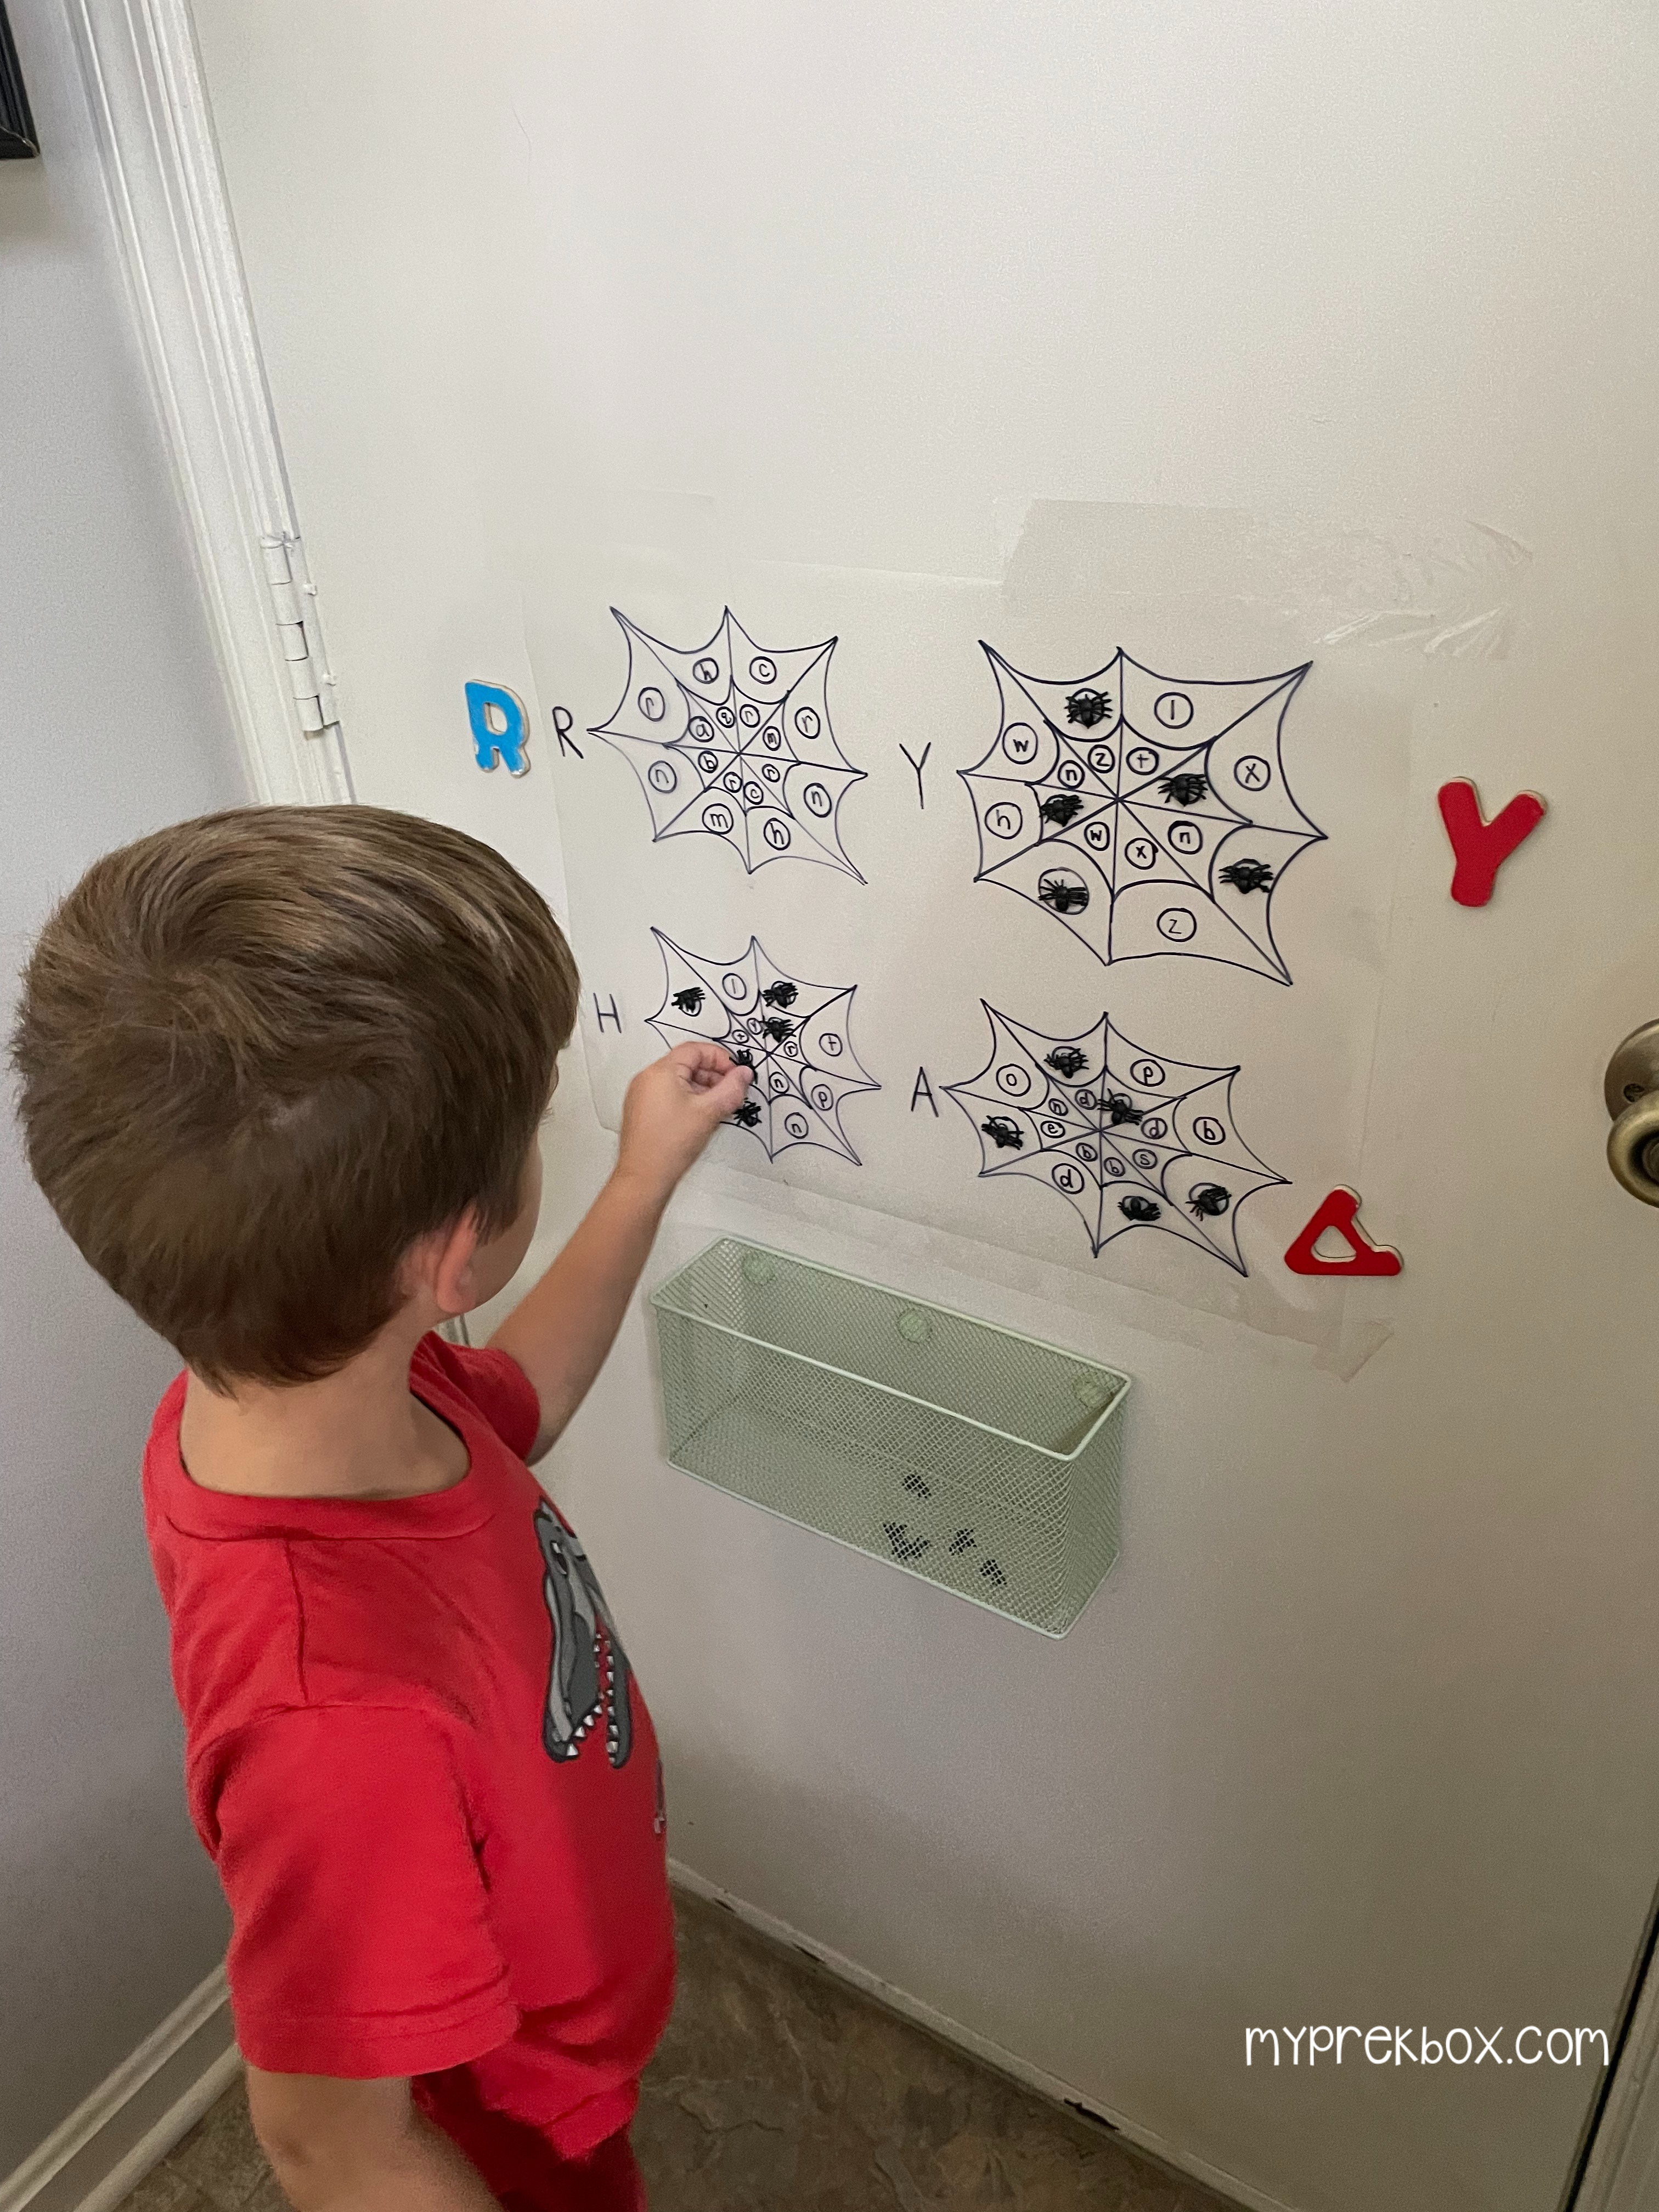 Preschool Halloween letter recognition Activity, kid standing next to wall with alpha web